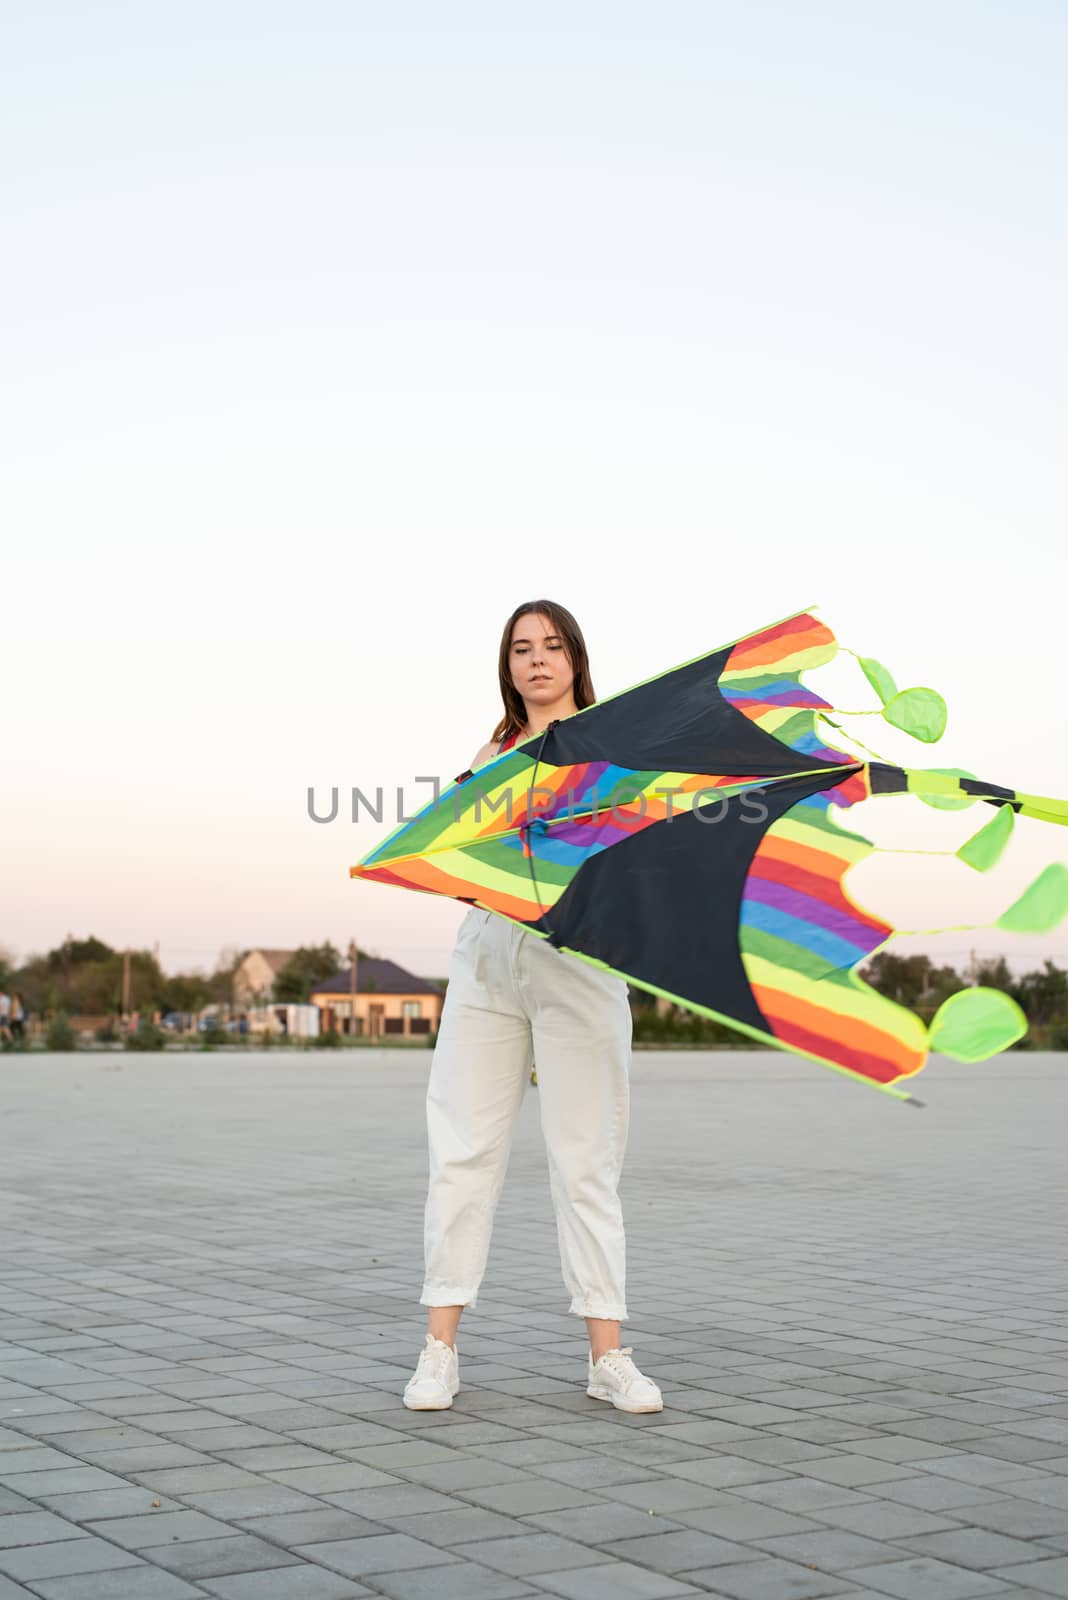 Young woman flying a kite in a public park at sunset by Desperada